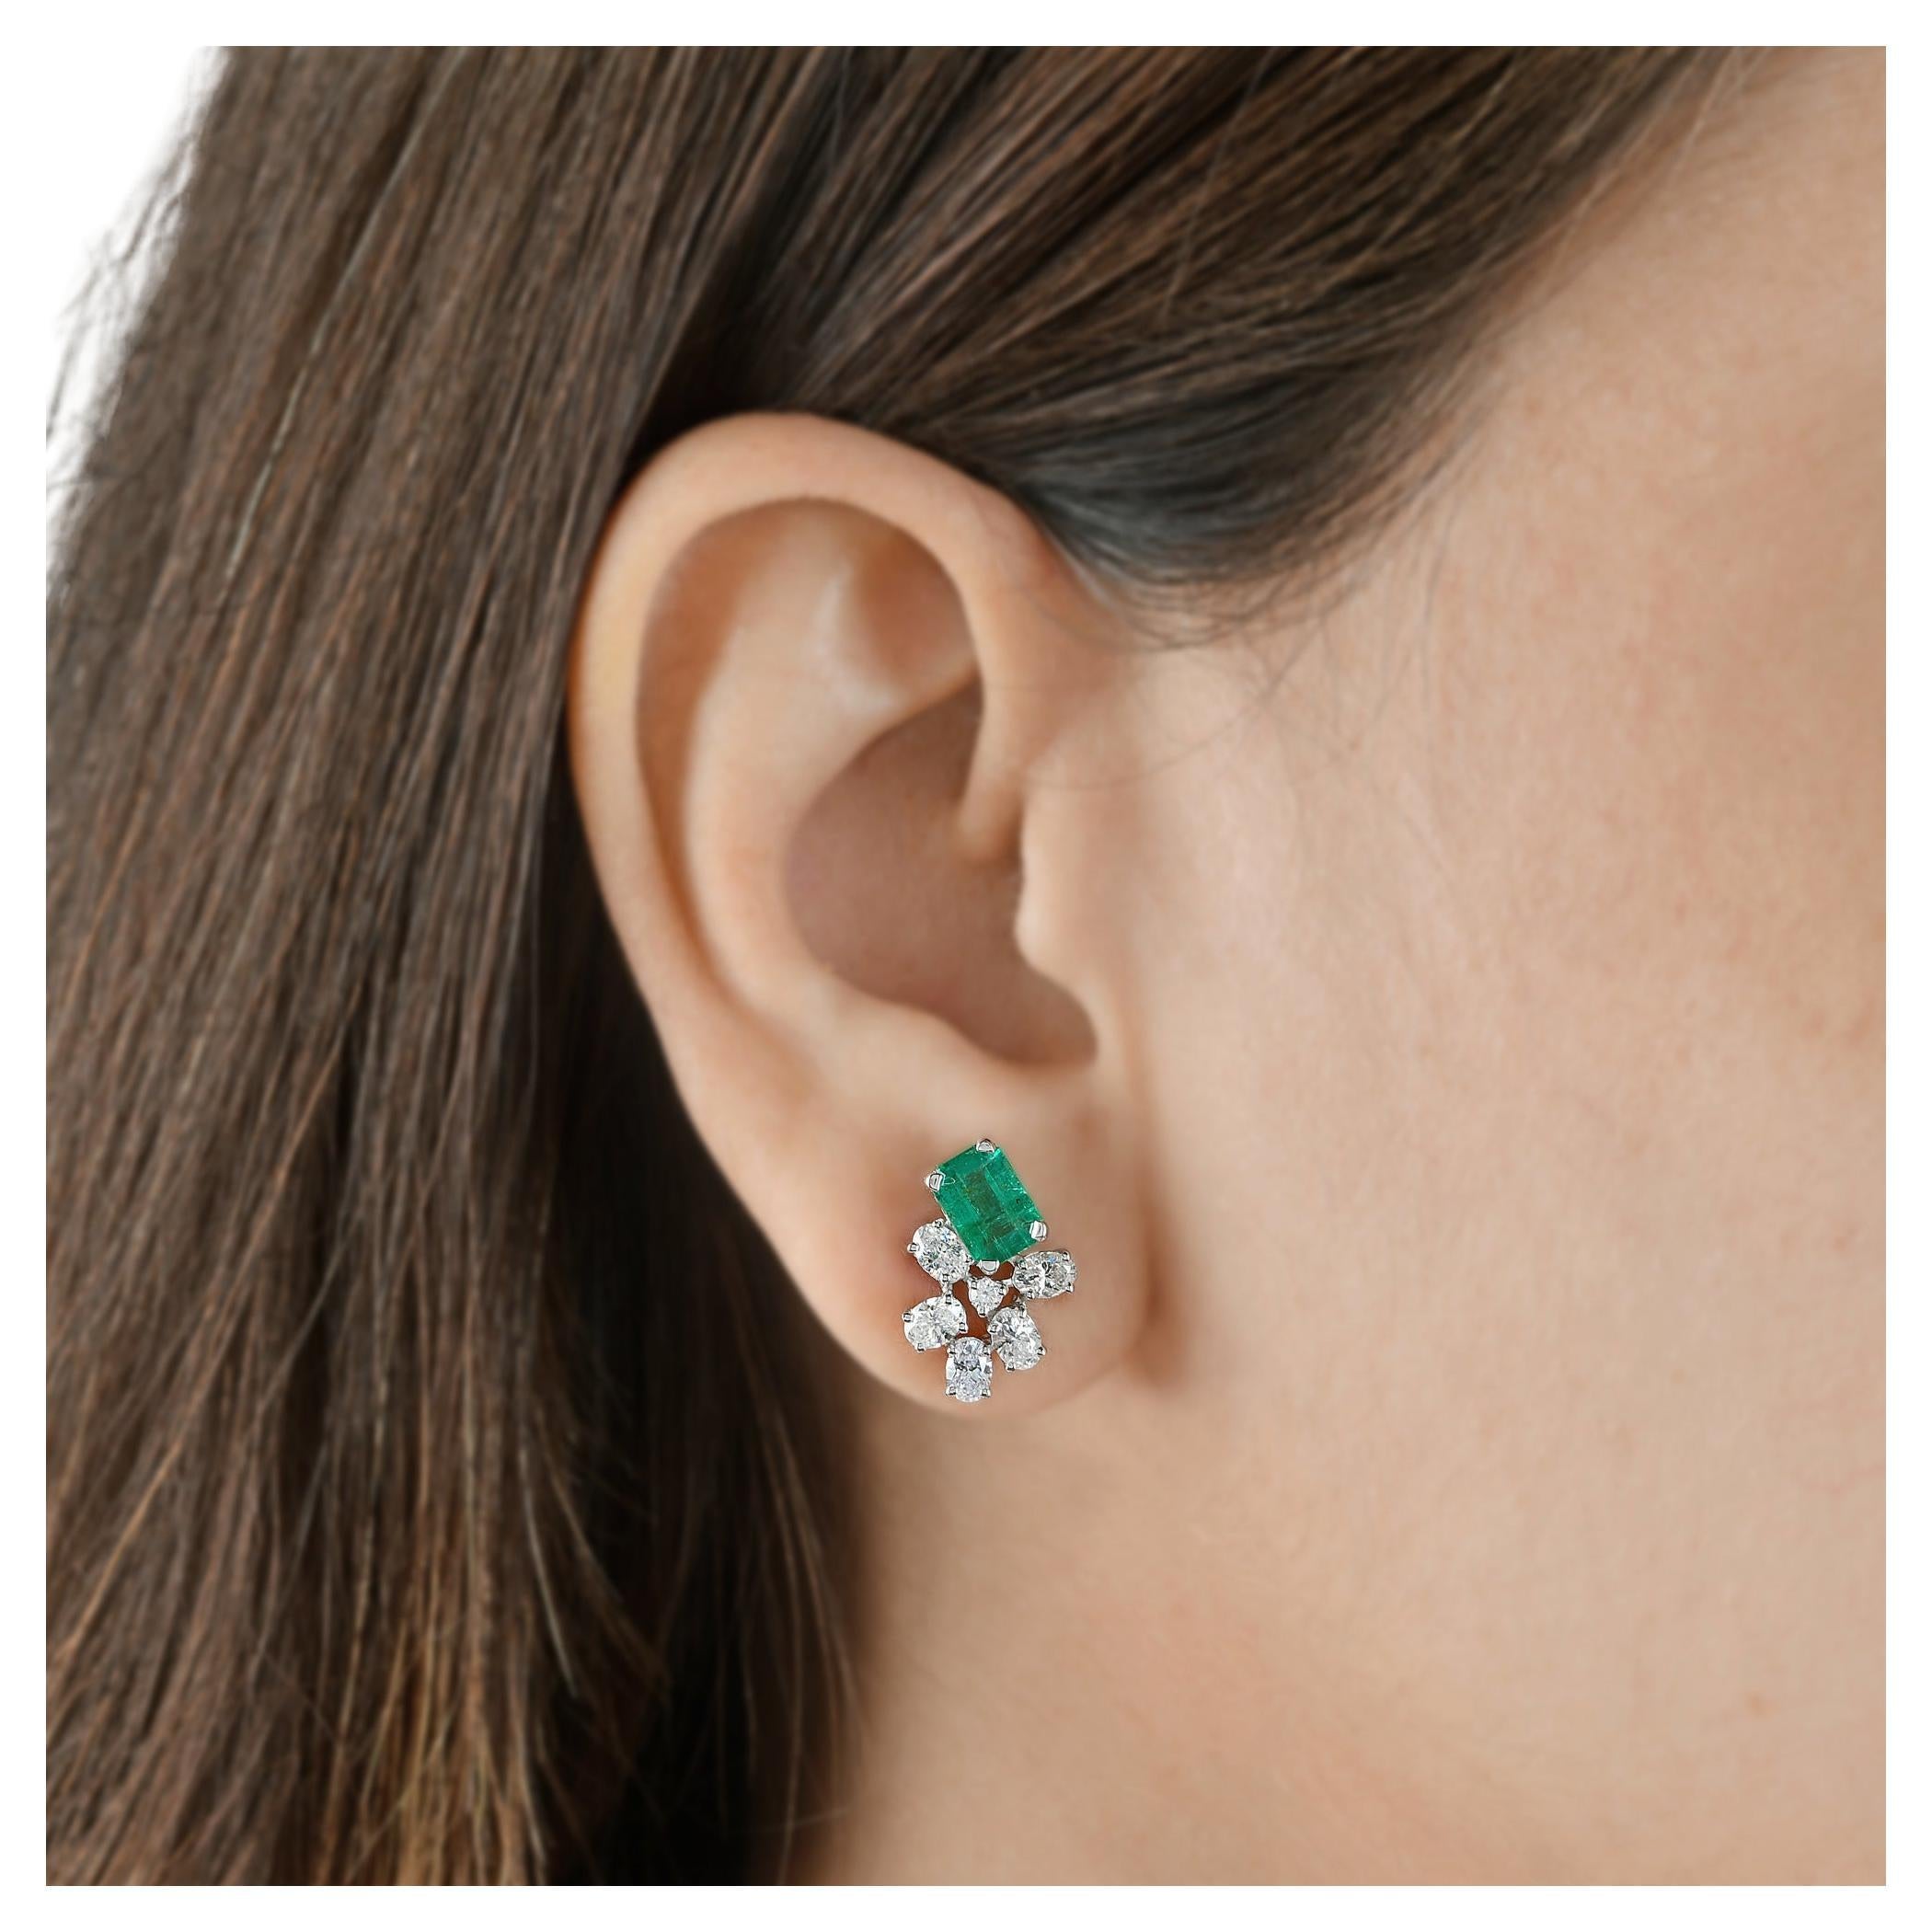 Item Code:-SEE-1787
Gross Weight :- 2.89 gm Approx.
18k White Gold Weight : 2.44 gm Approx.
Diamond Weight :- 0.72 ct. Approx. ( AVERAGE DIAMOND CLARITY SI1-SI2 & COLOR H-I )
Emerald Weight :- 1.52 ct. Approx.
Earring Length :- 15 mm Approx.
✦